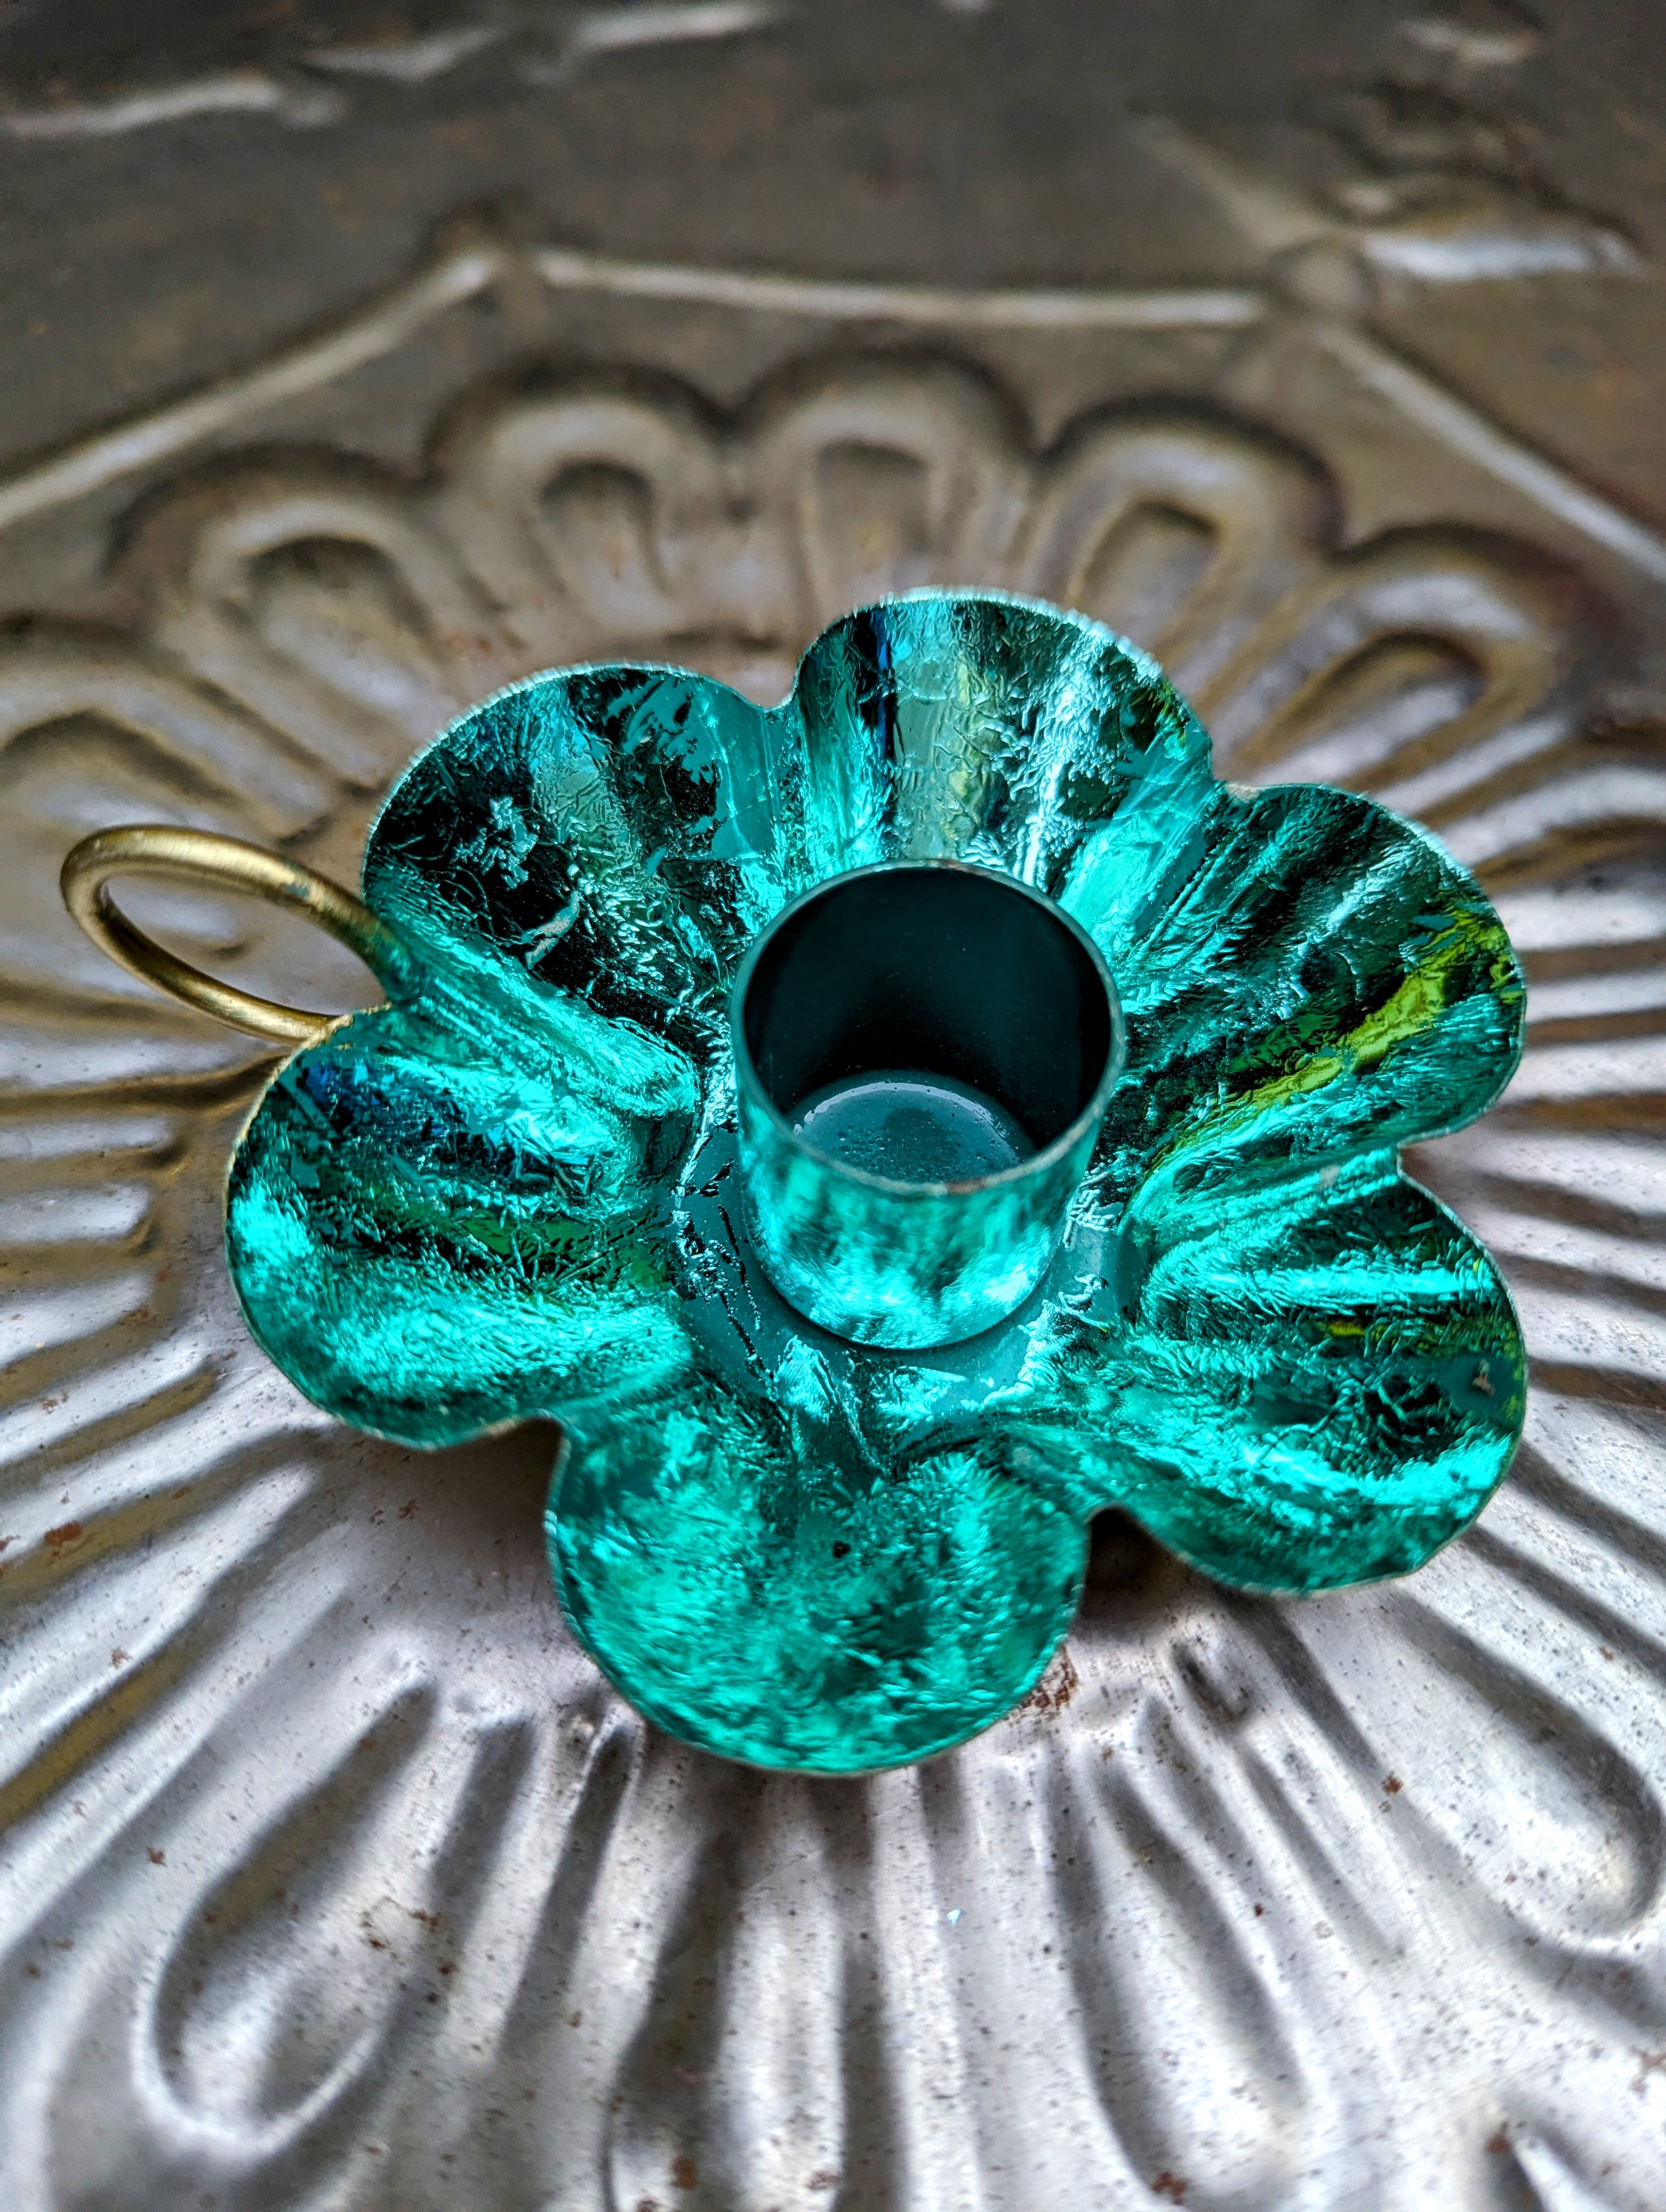 Foiled and fancy candle holders - small